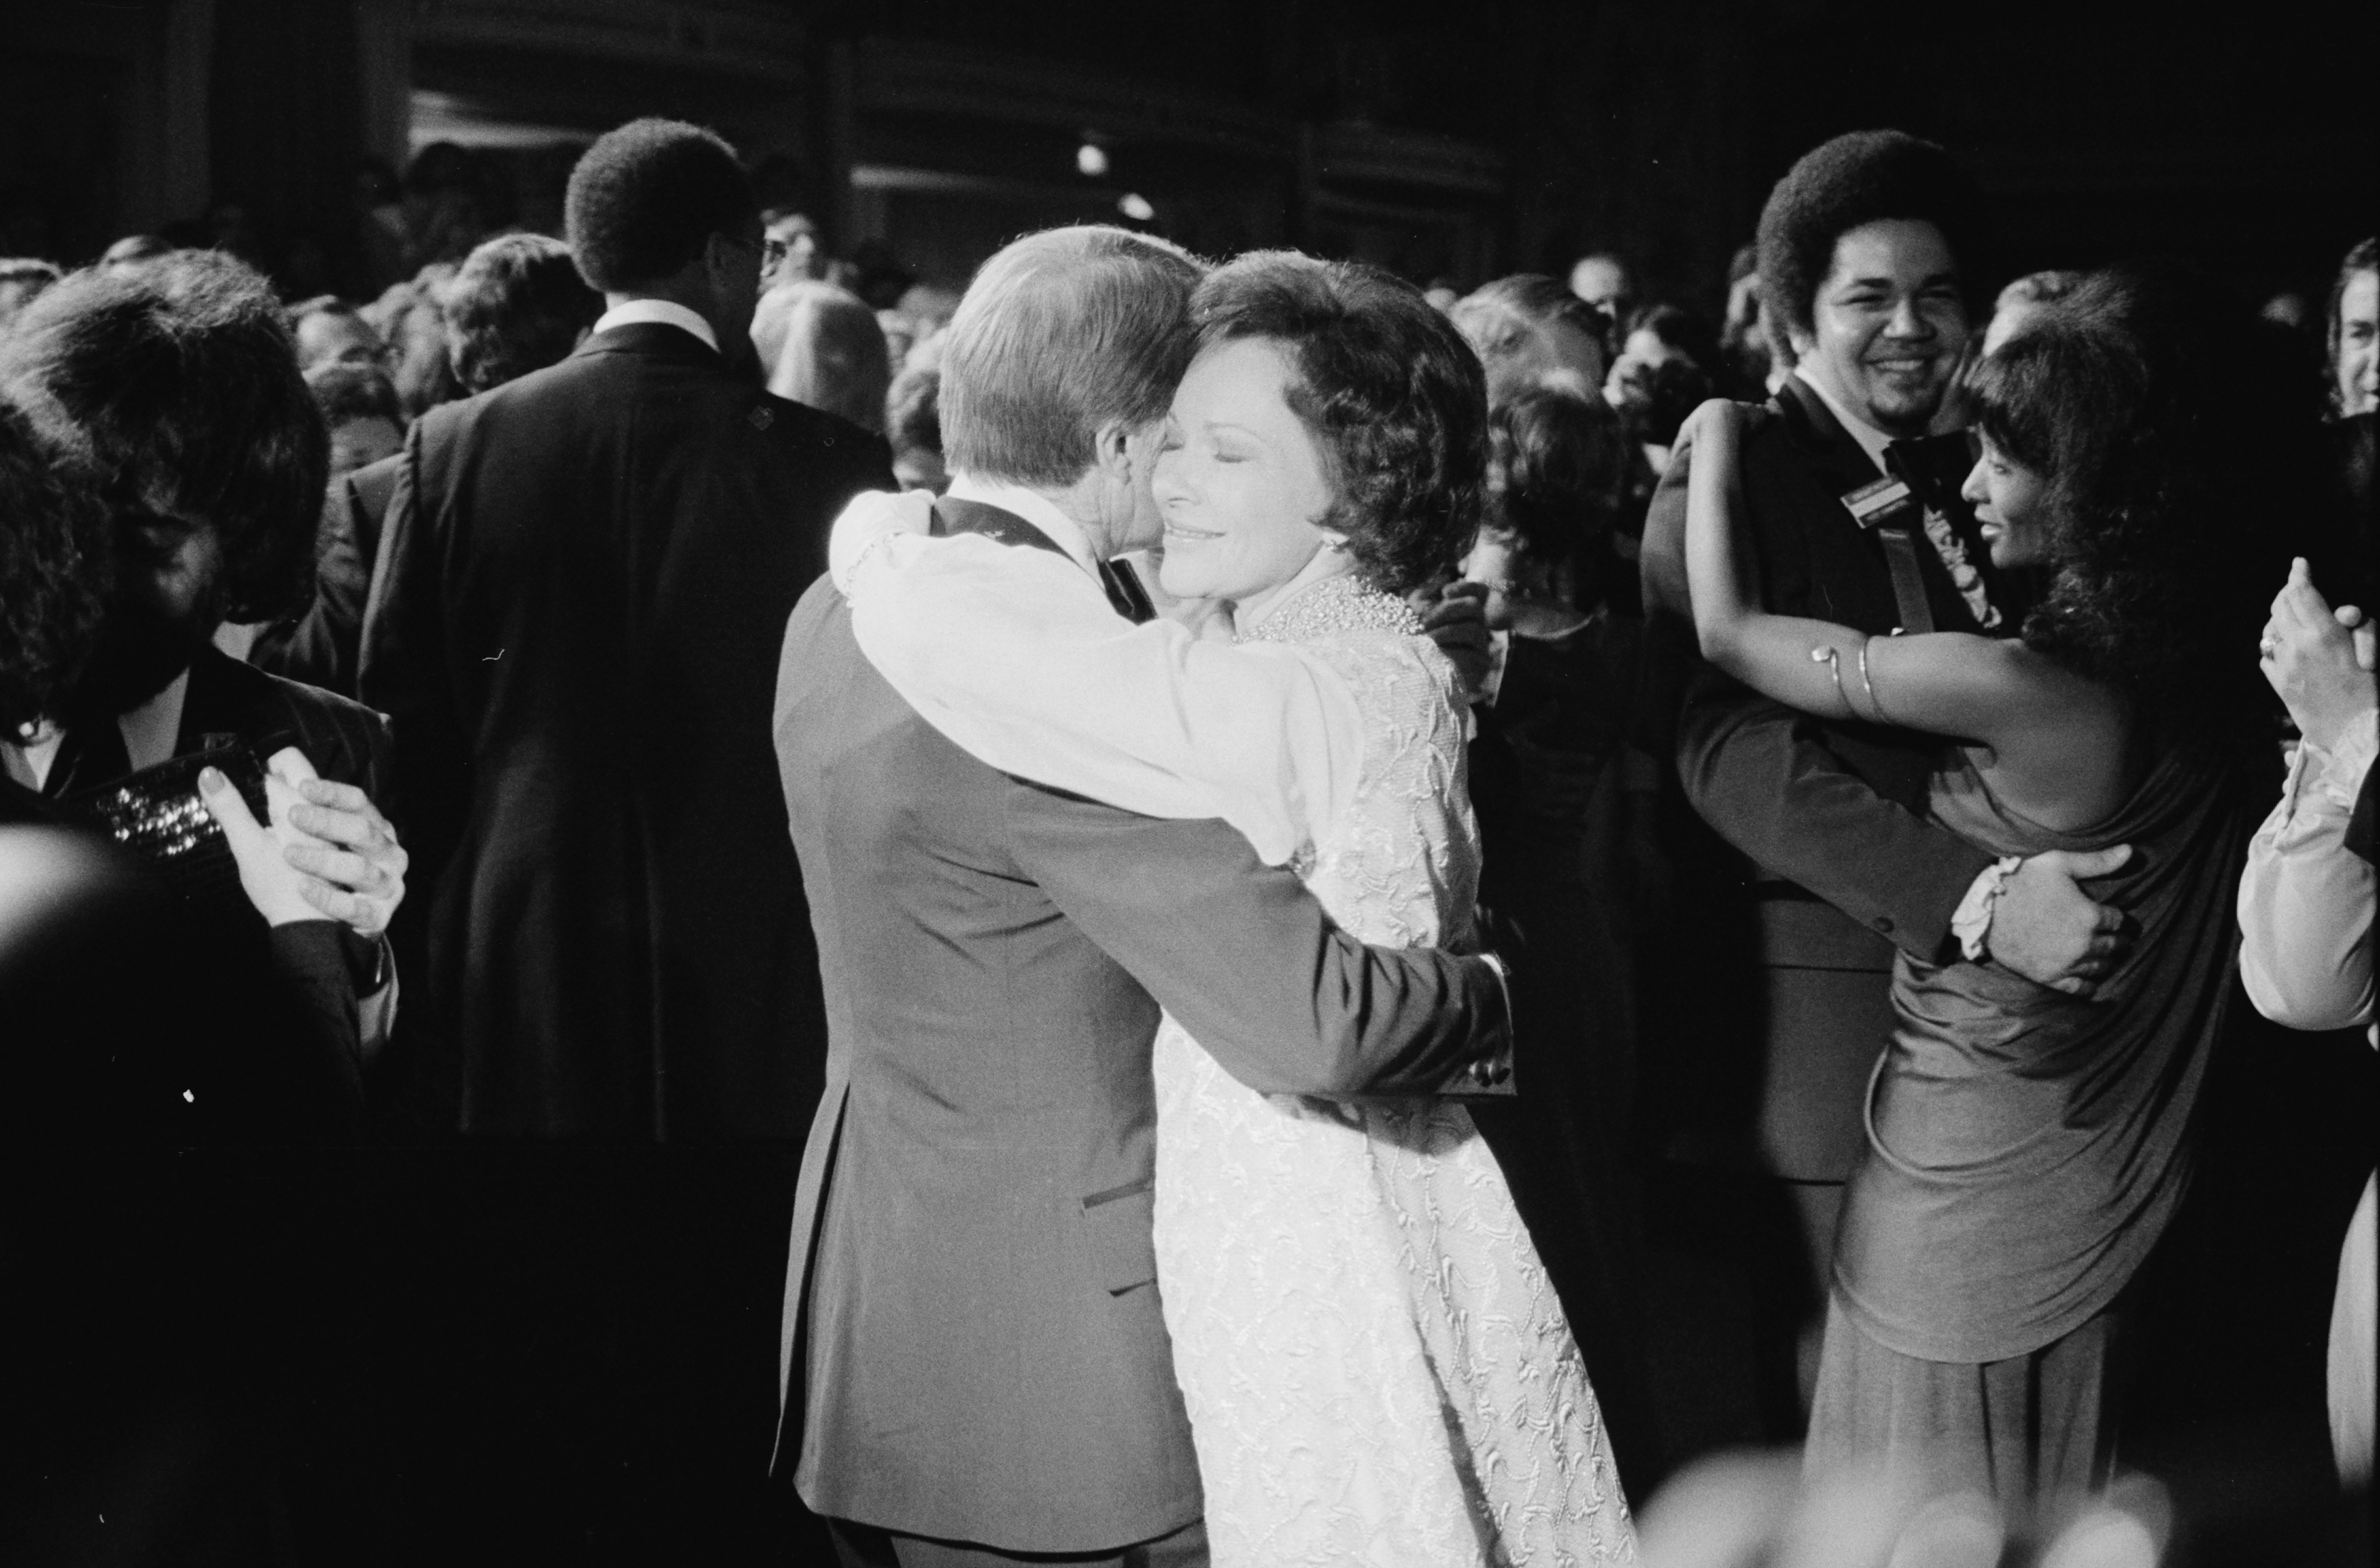 Jimmy and Rosalynn Carter during the inaugural ball in Washington, D.C. on January 20, 1977 | Source: Getty Images